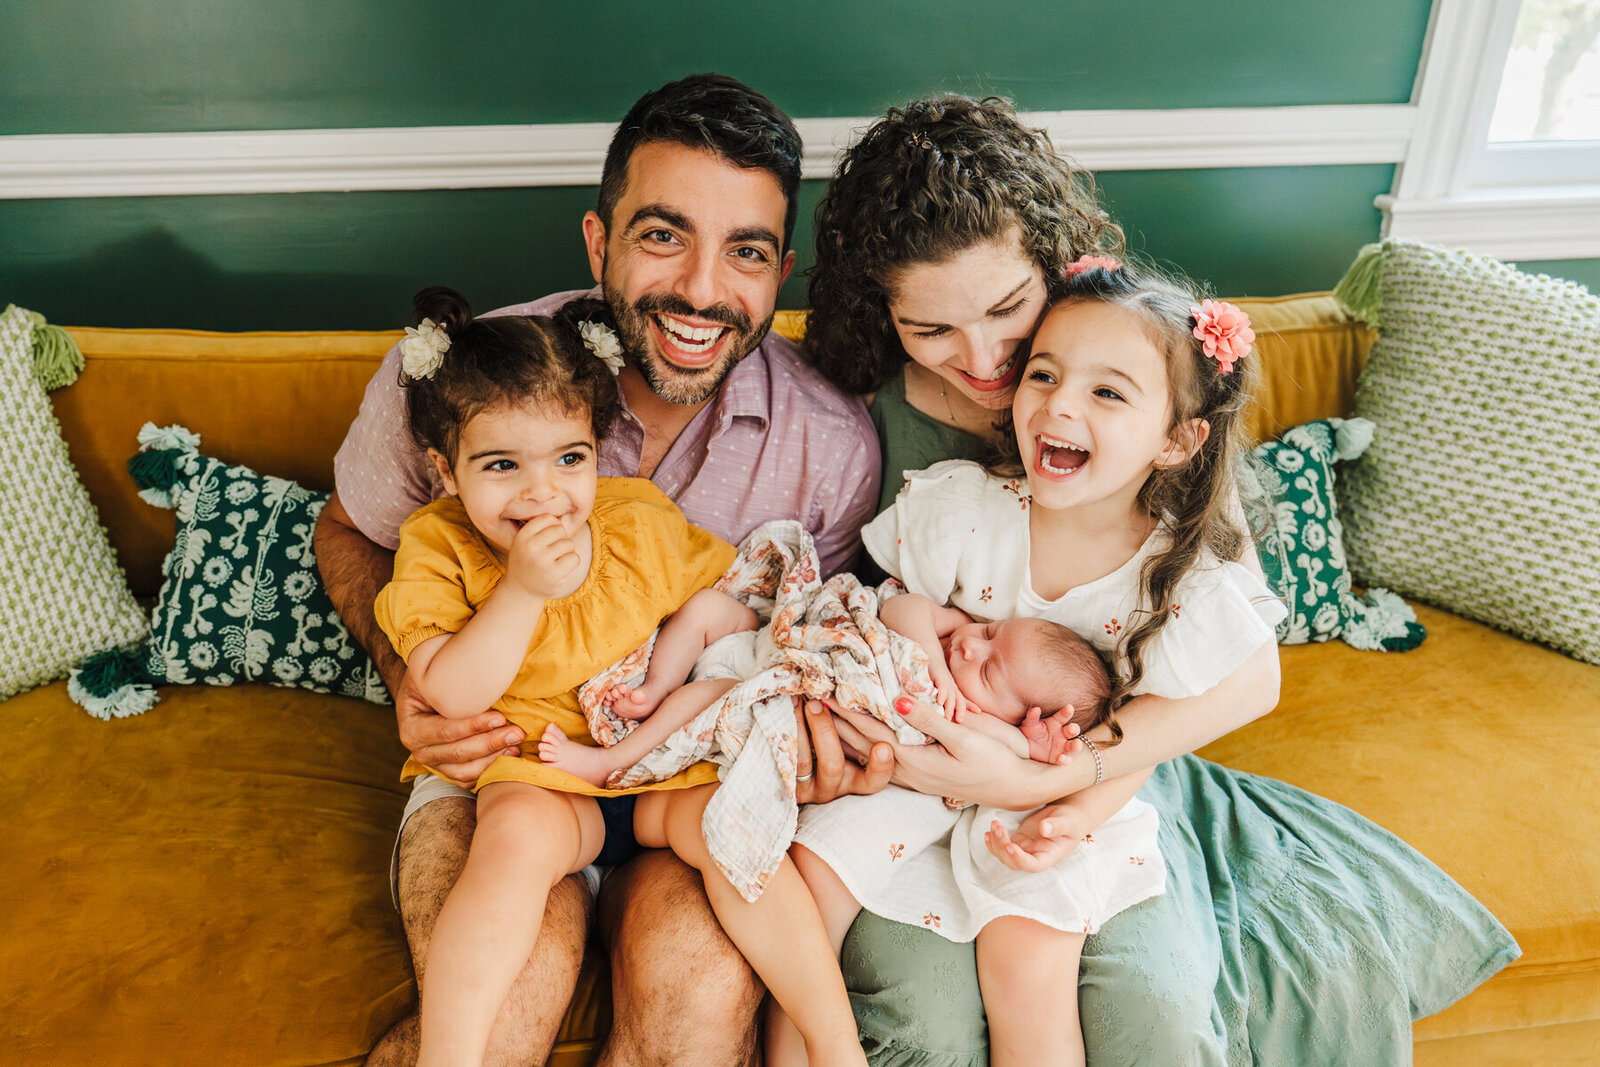 family laughs together on a mustard couch in a green room holding new baby